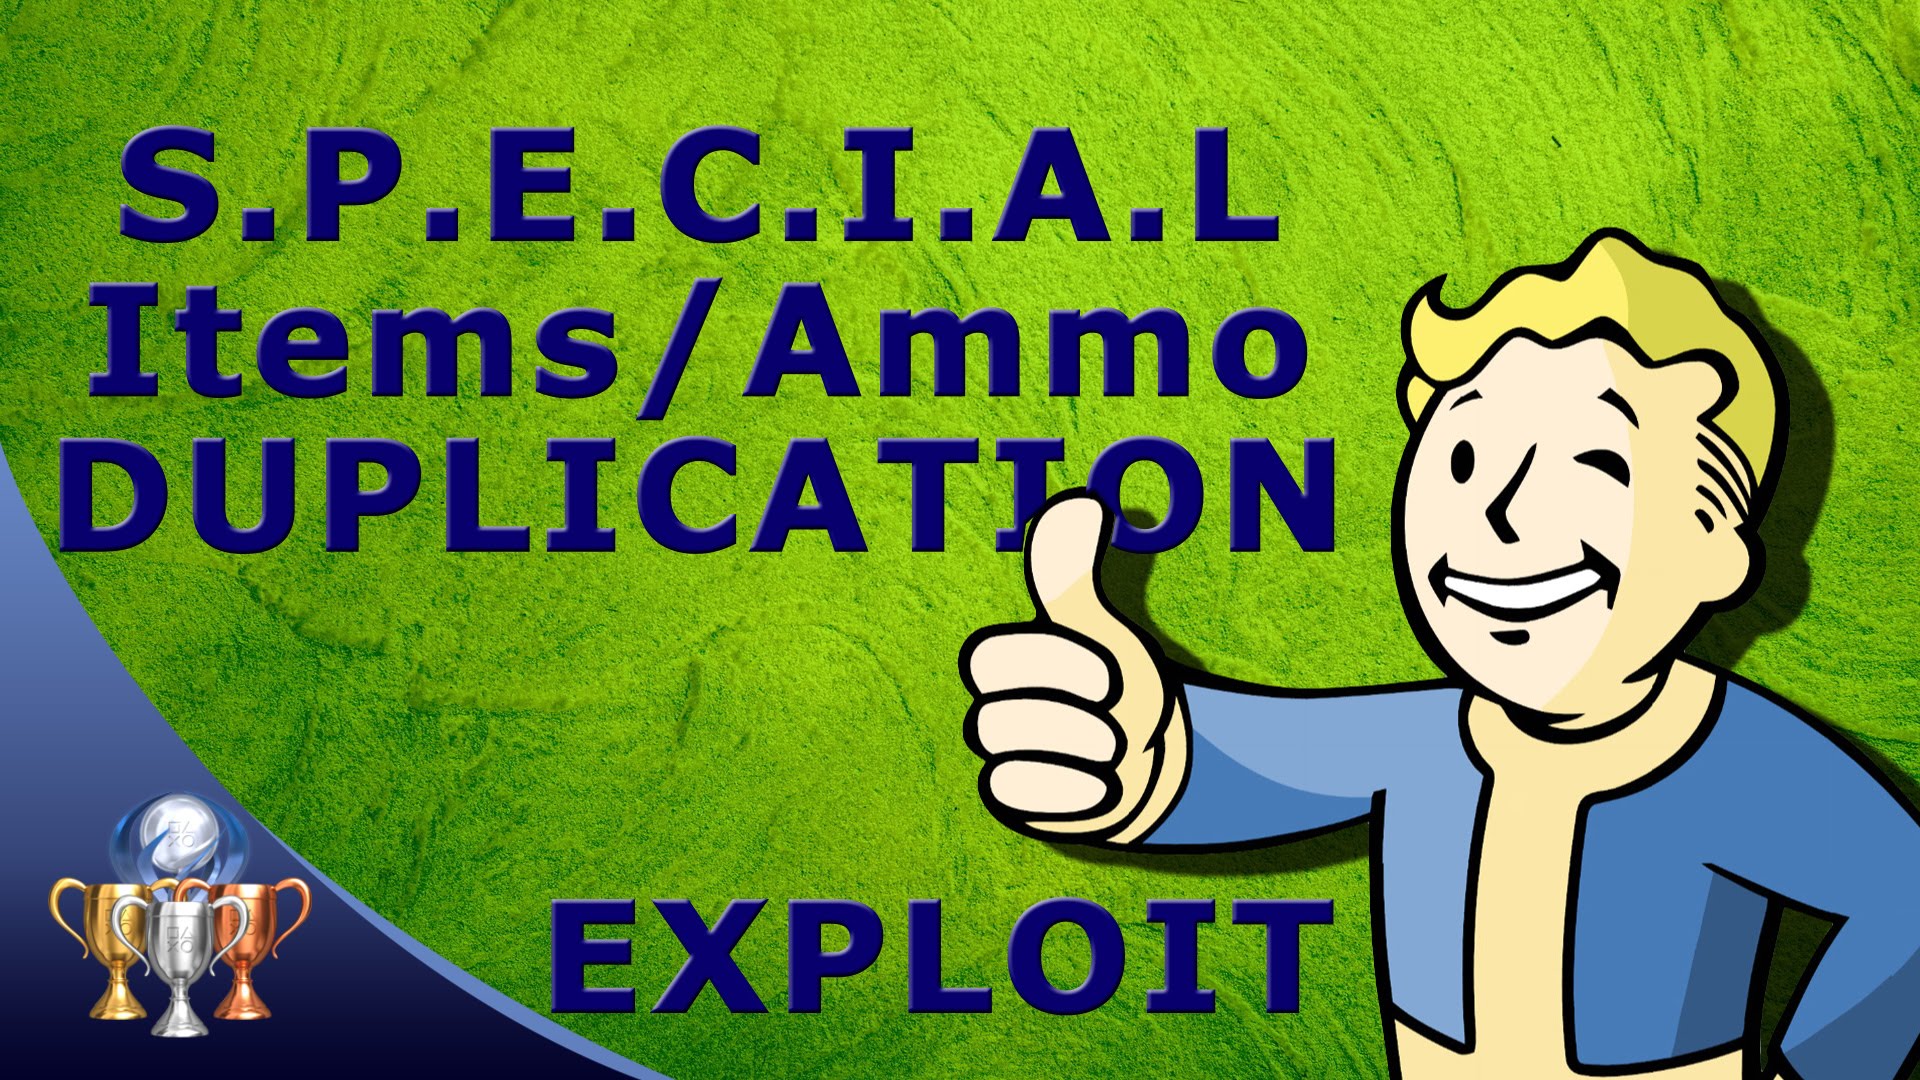 Fallout 4 You Re Special Duplication Exploit Unlimited S P E C I A L Abilities With Glitch Ps4trophies Gaming